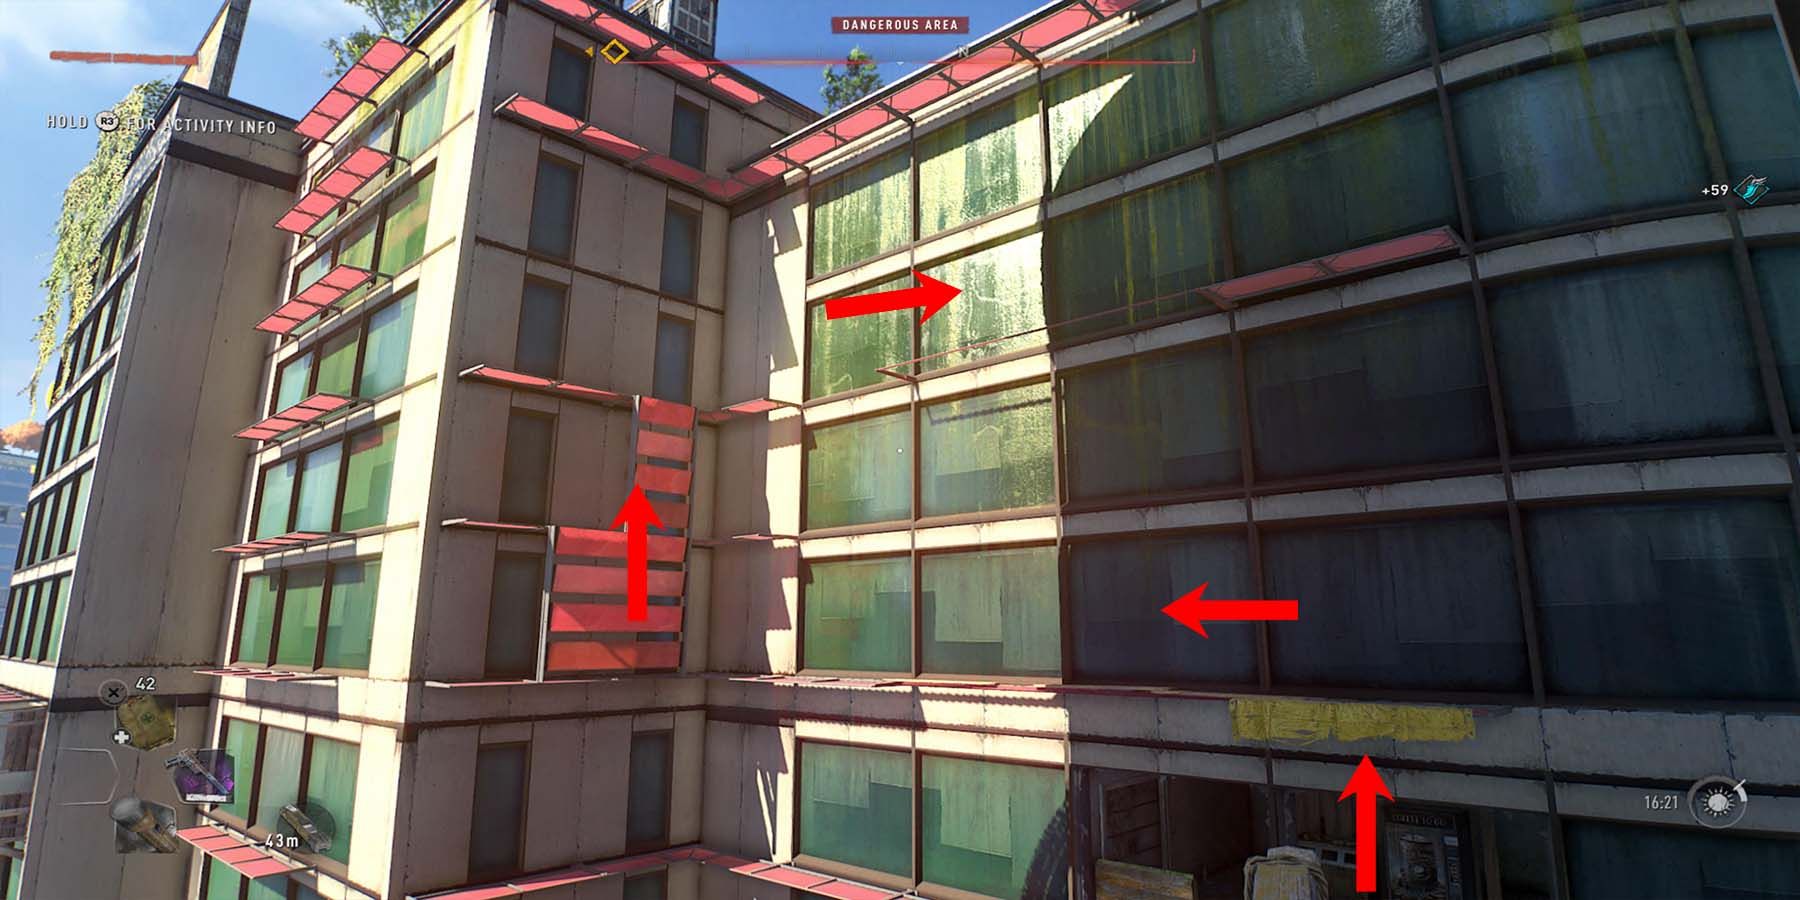 dying light 2 downtown bandit camp central scaffolding route